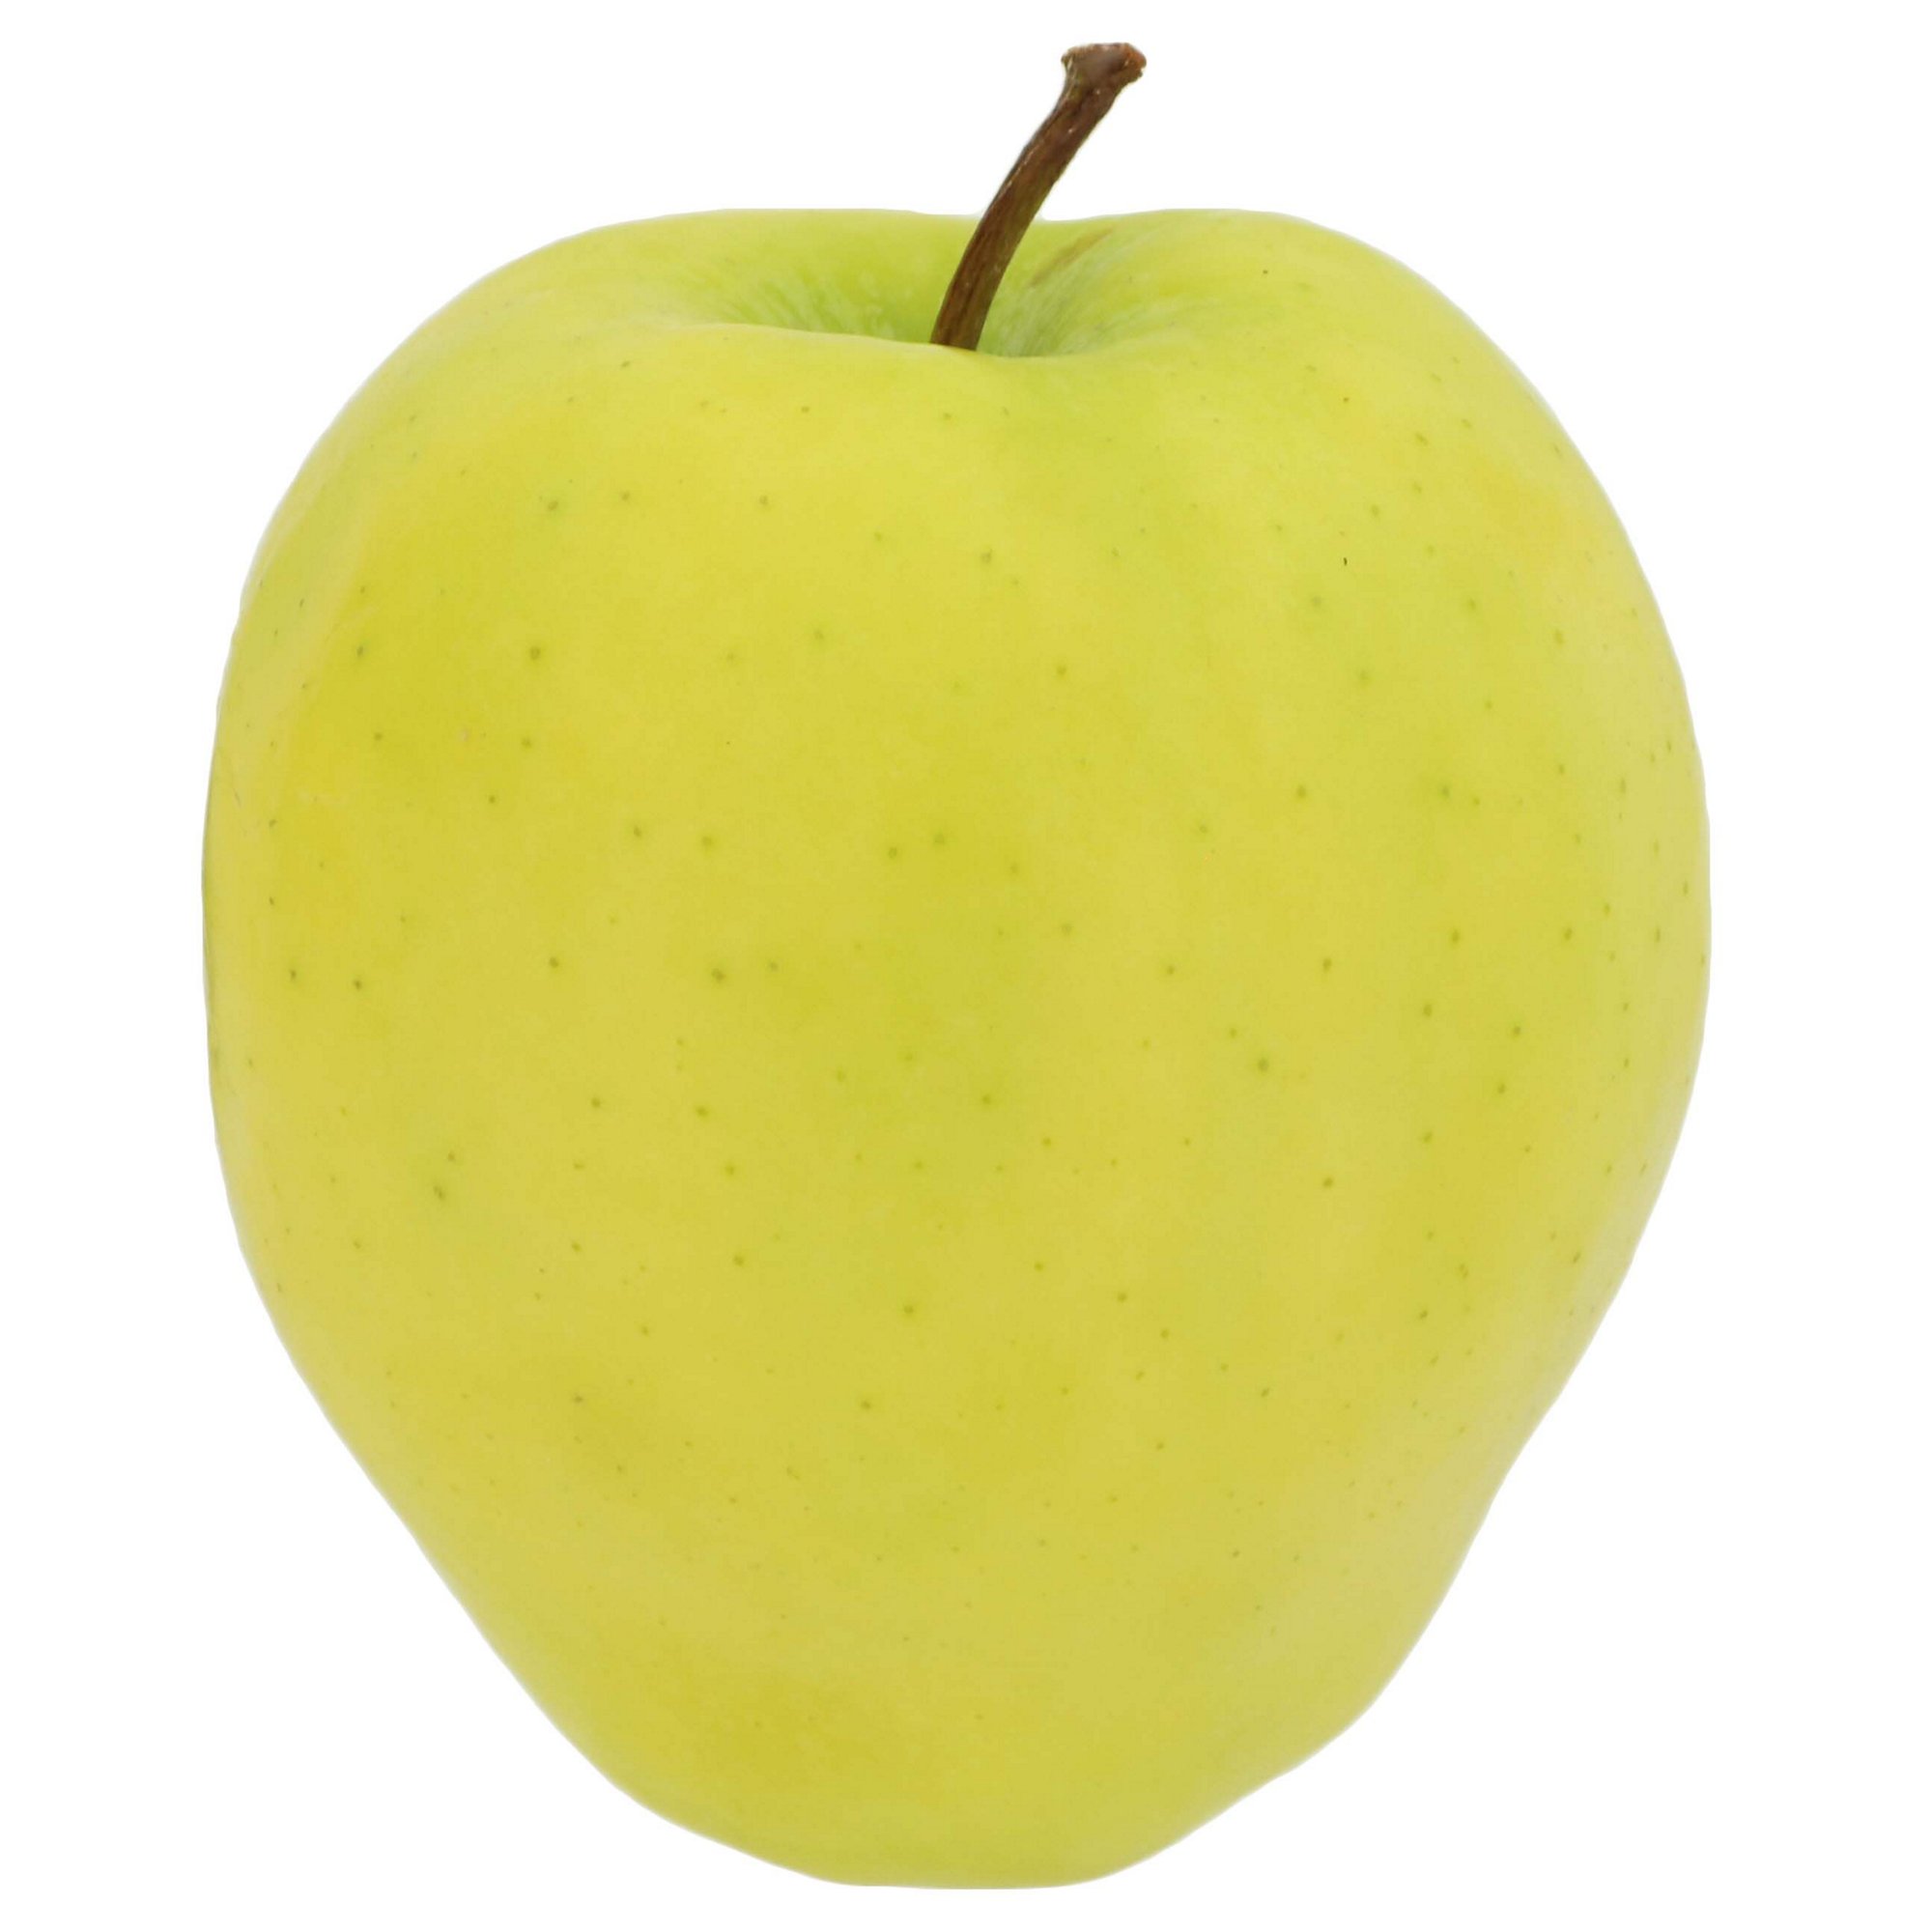 Fresh Golden Delicious Apples - Shop Apples at HEB